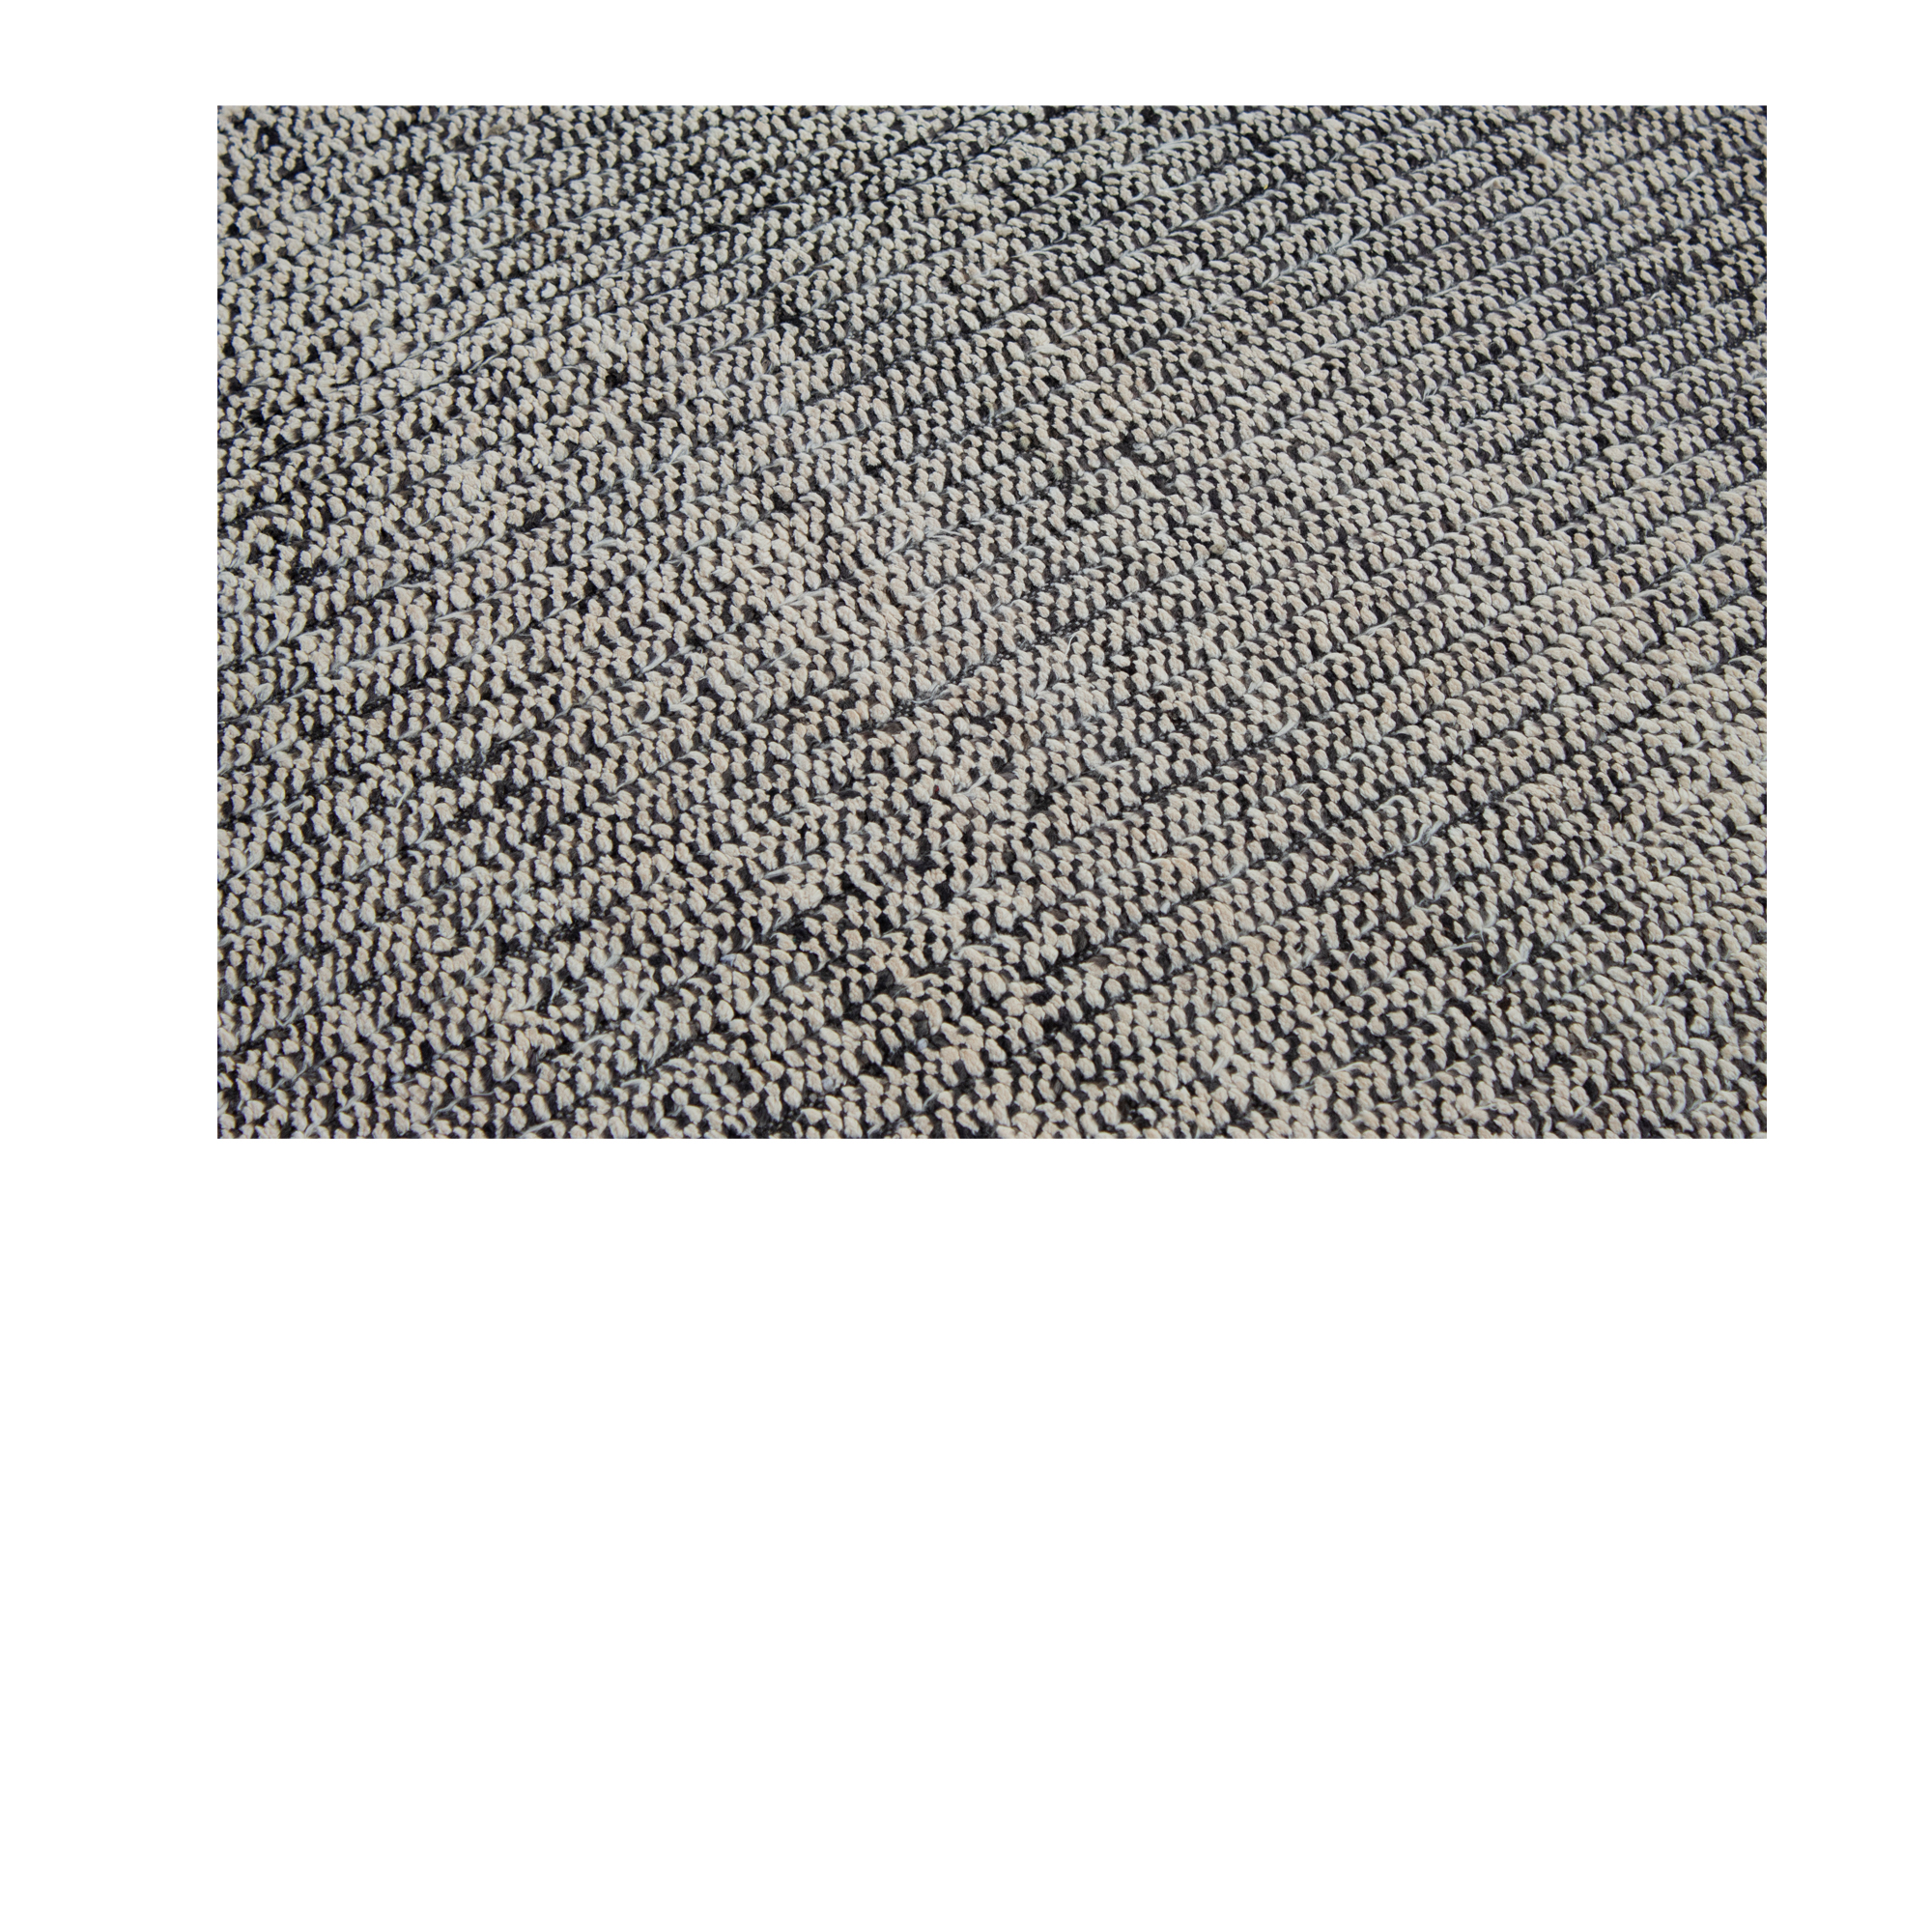 This Checkered flatweave rug is hand-knotted and made of 100% wool.